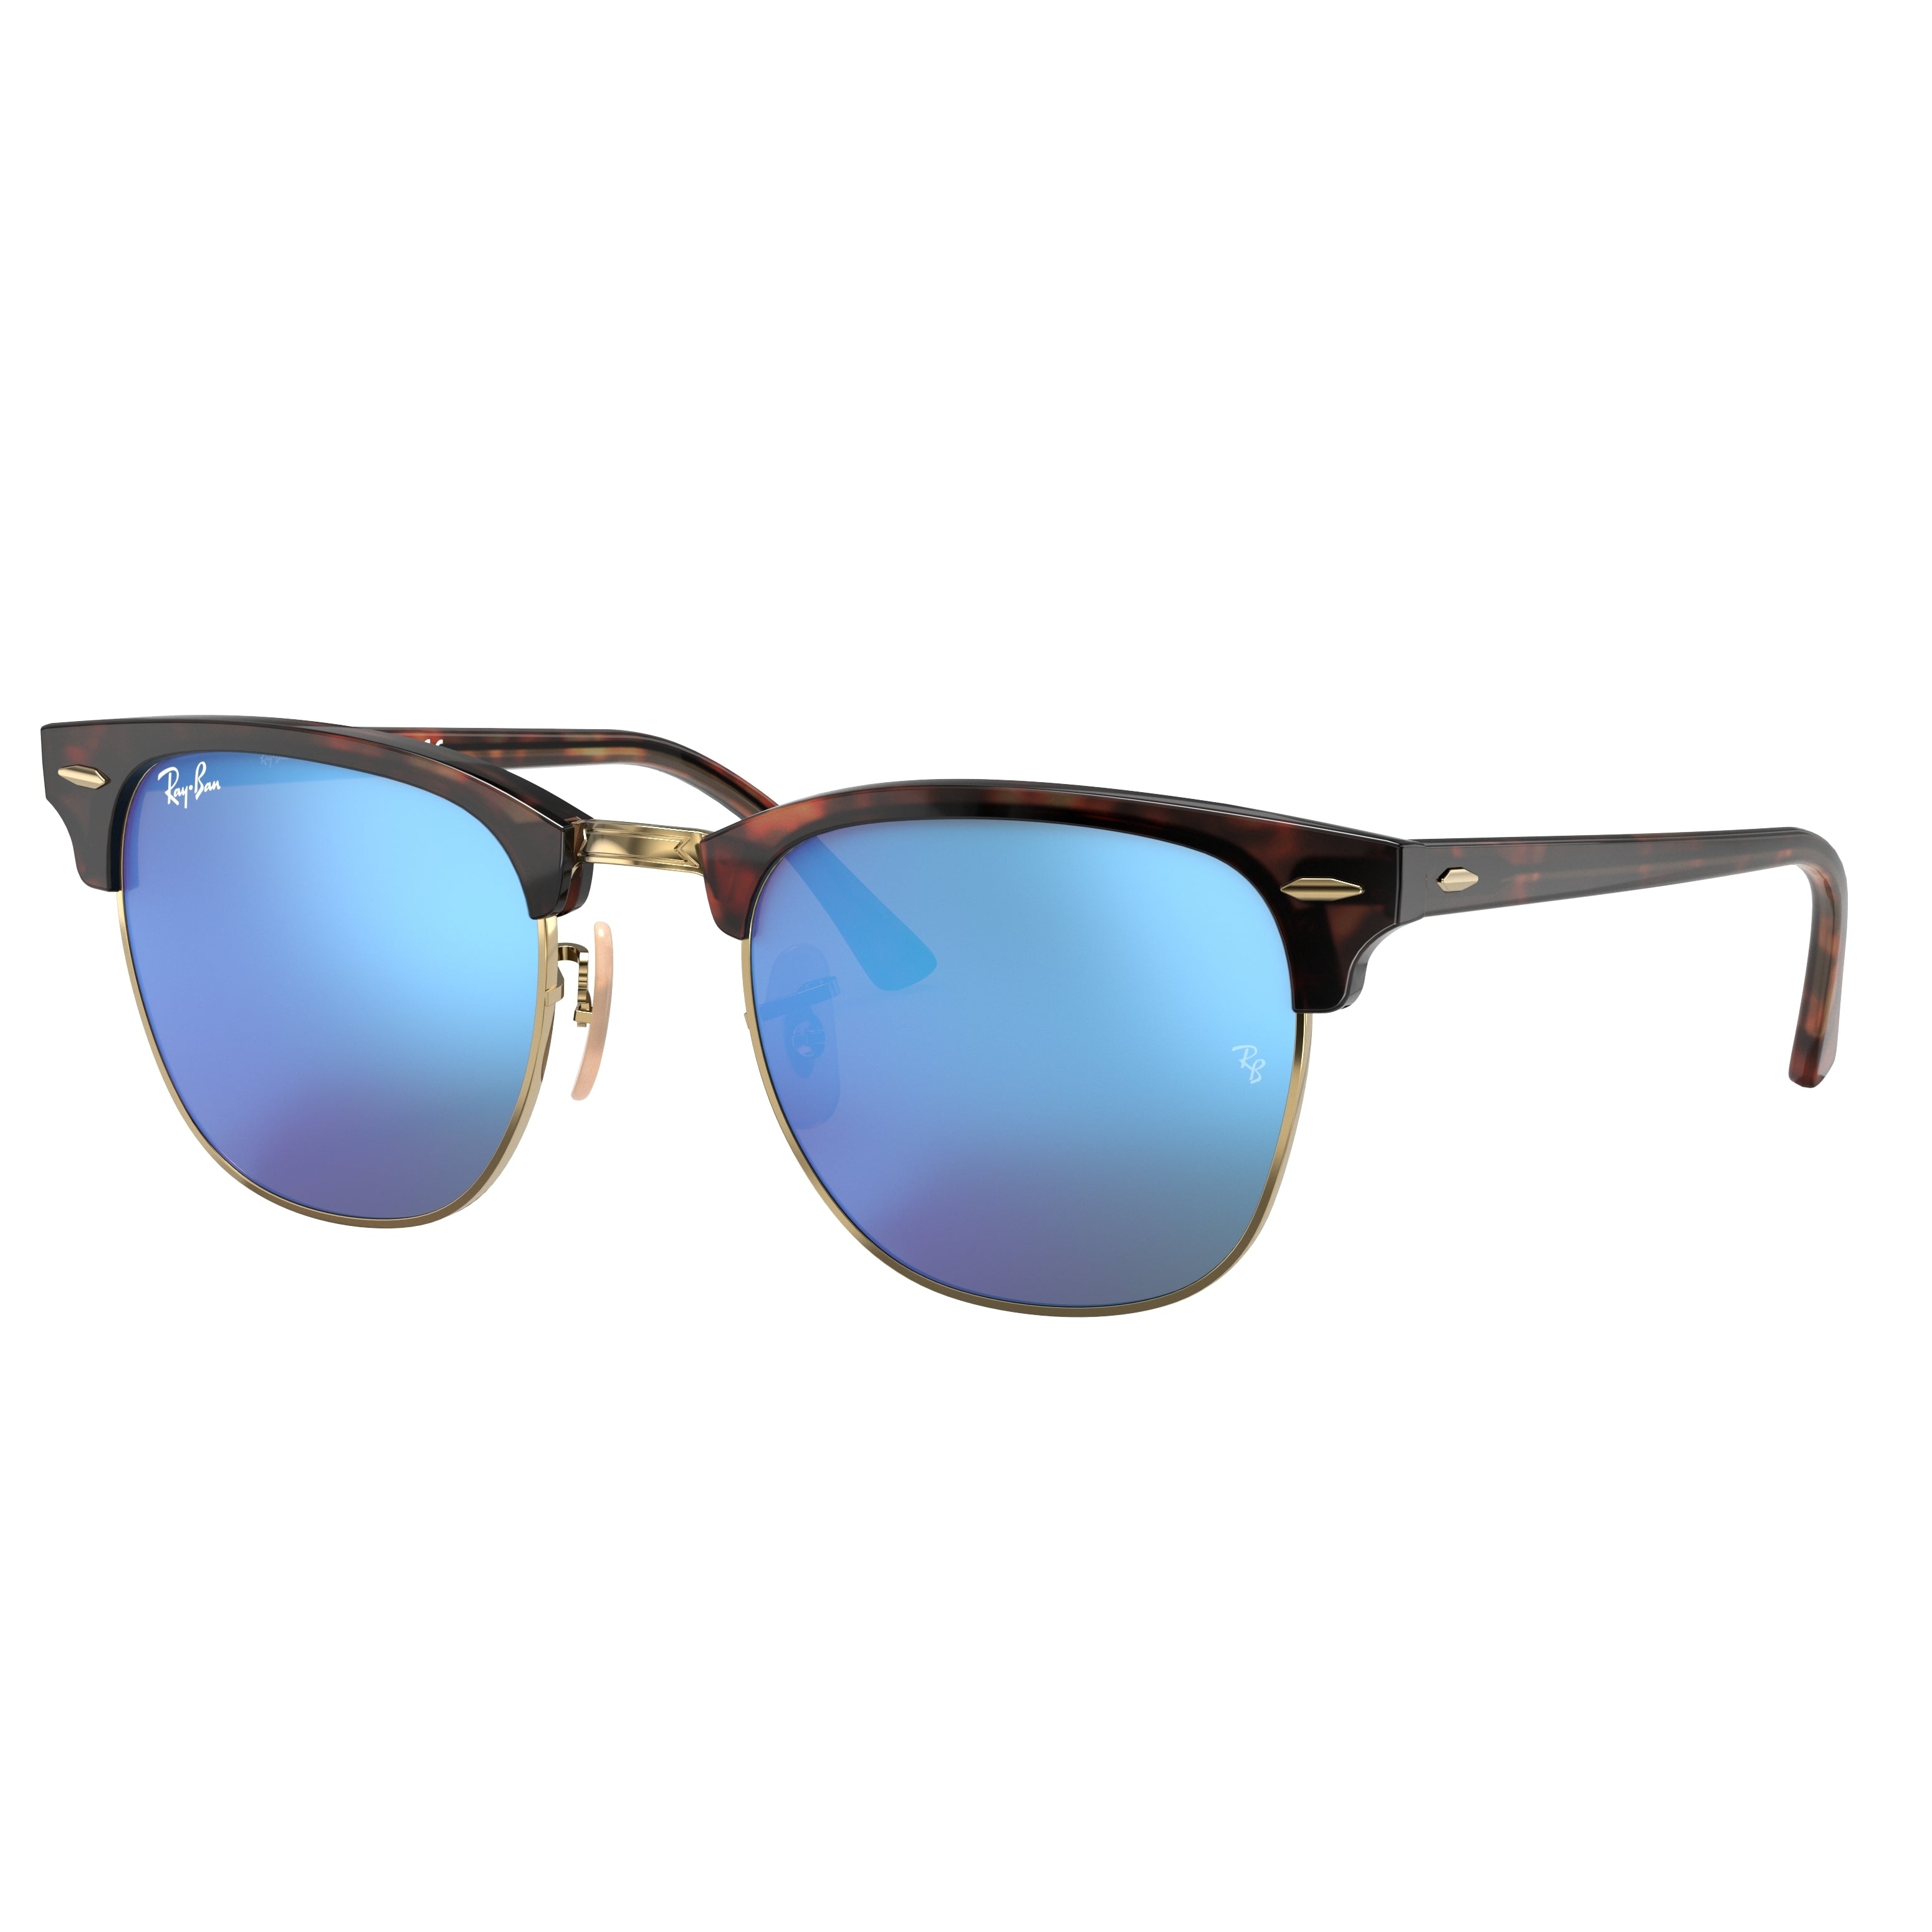 Ray-Ban Ray-Ban Clubmaster Flash Lenses Blue Flash Square Unisex Sunglasses RB3016 114517 51